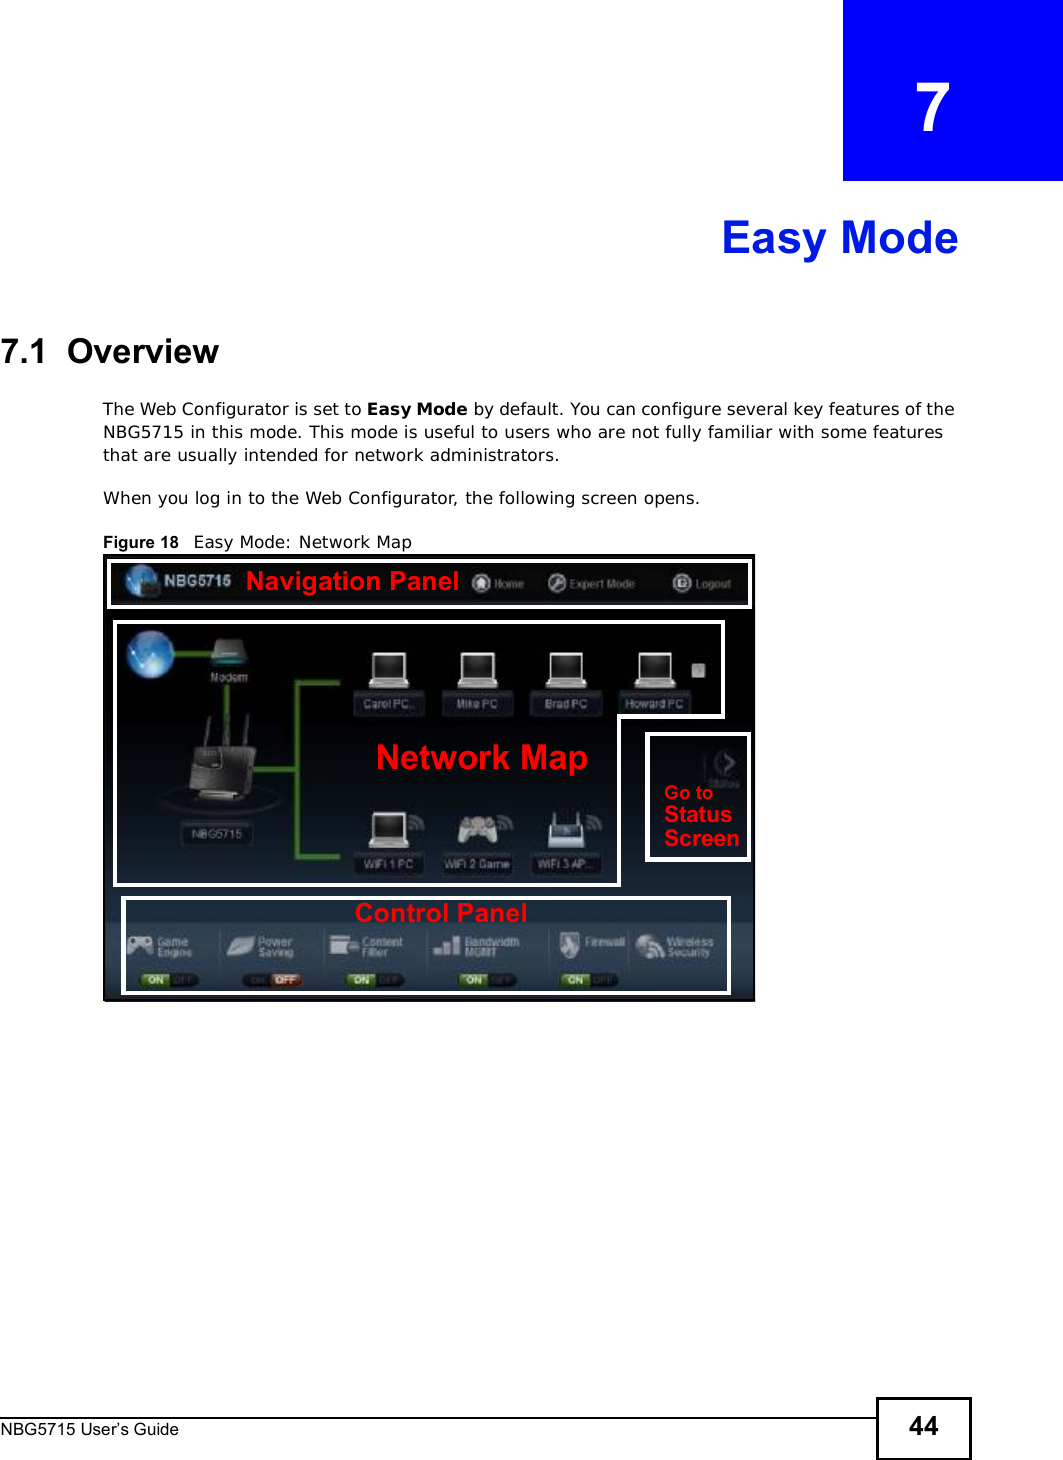 NBG5715 User’s Guide 44CHAPTER   7Easy Mode7.1  OverviewThe Web Configurator is set to Easy Mode by default. You can configure several key features of the NBG5715 in this mode. This mode is useful to users who are not fully familiar with some features that are usually intended for network administrators.When you log in to the Web Configurator, the following screen opens.Figure 18   Easy Mode: Network Map Network MapControl PanelGo toStatusScreenNavigation Panel